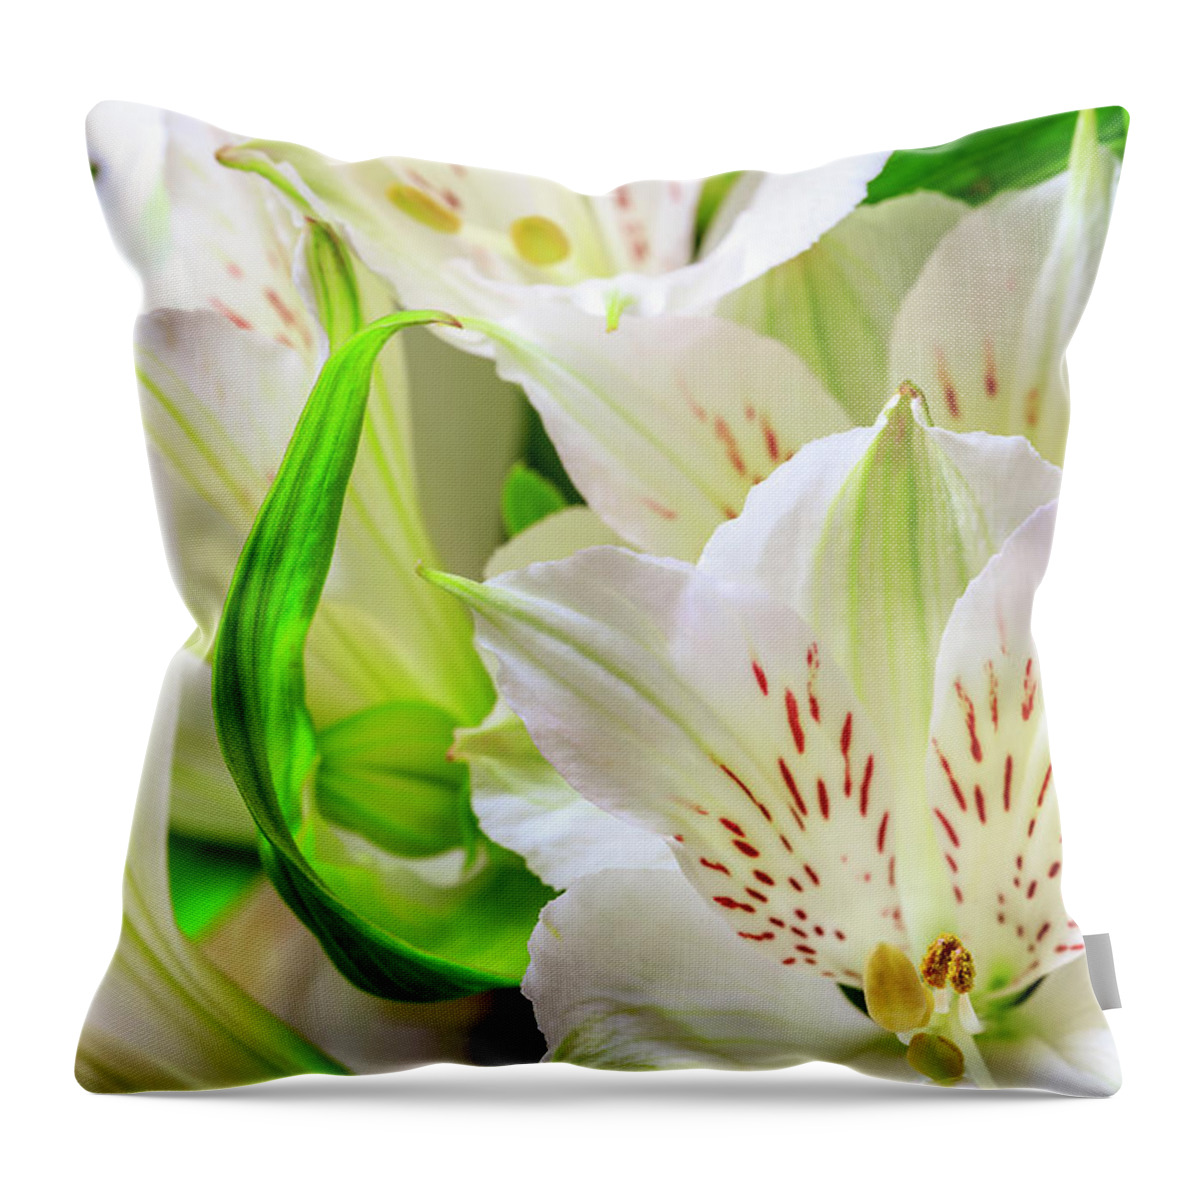 Peruvian Lilies Throw Pillow featuring the photograph Peruvian Lilies In Bloom #2 by Richard J Thompson